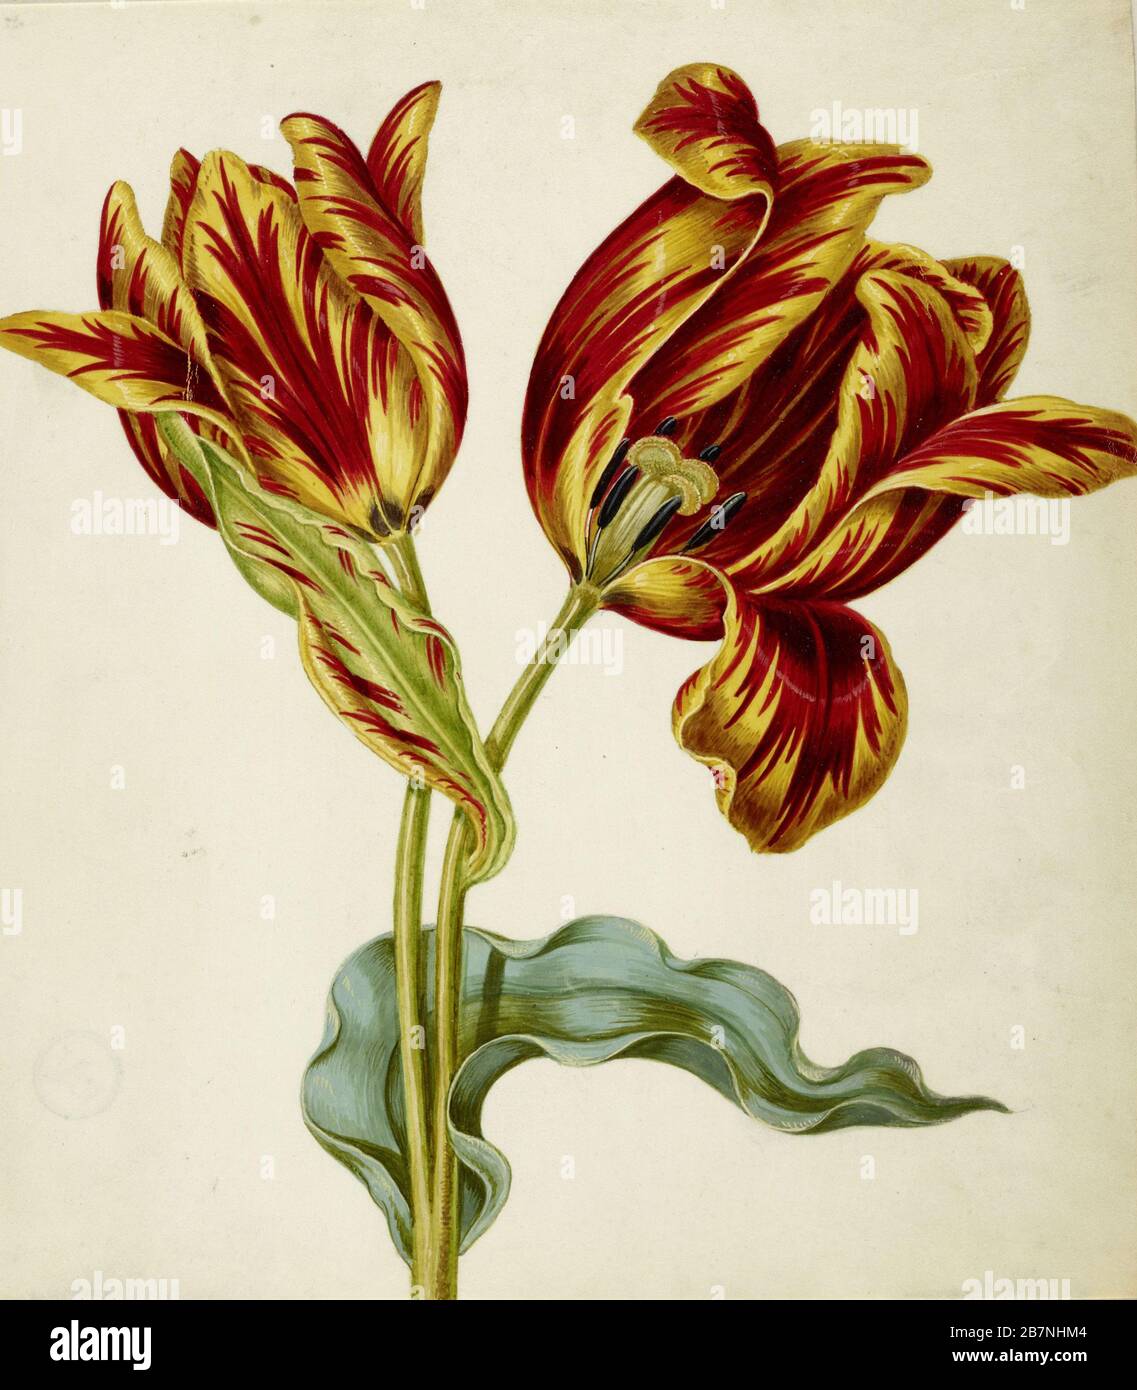 Tulip, c. 1660. Found in the Collection of Staatliche Museen, Berlin. Stock Photo